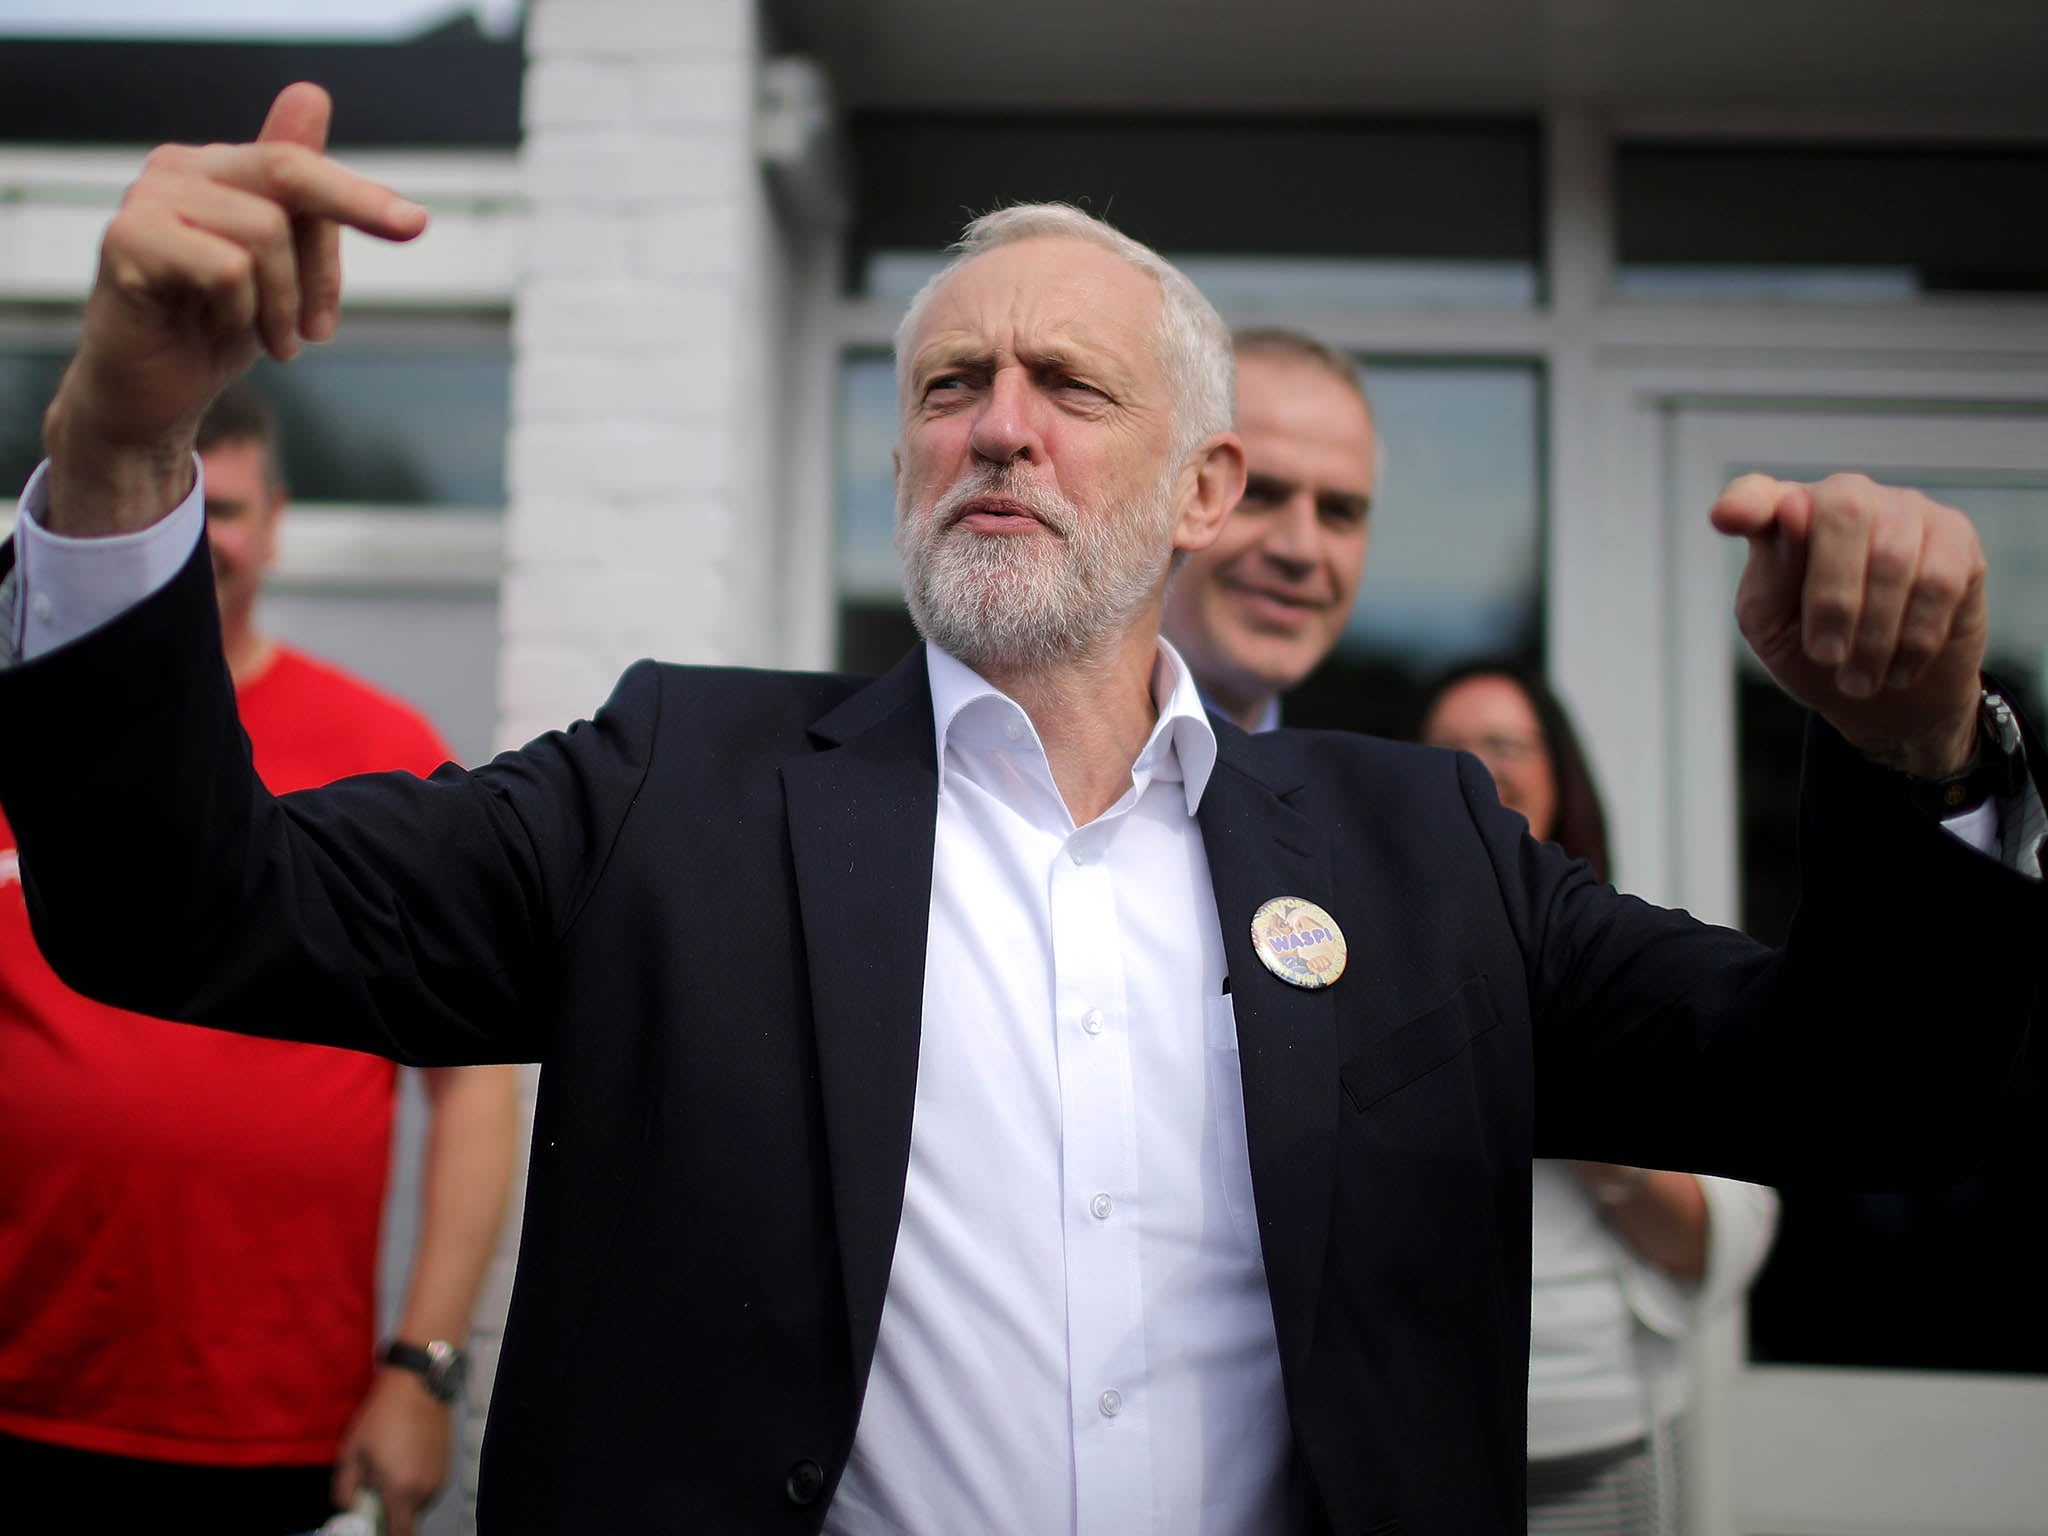 Major hit: the music scene has been rallying in support of the Labour leader